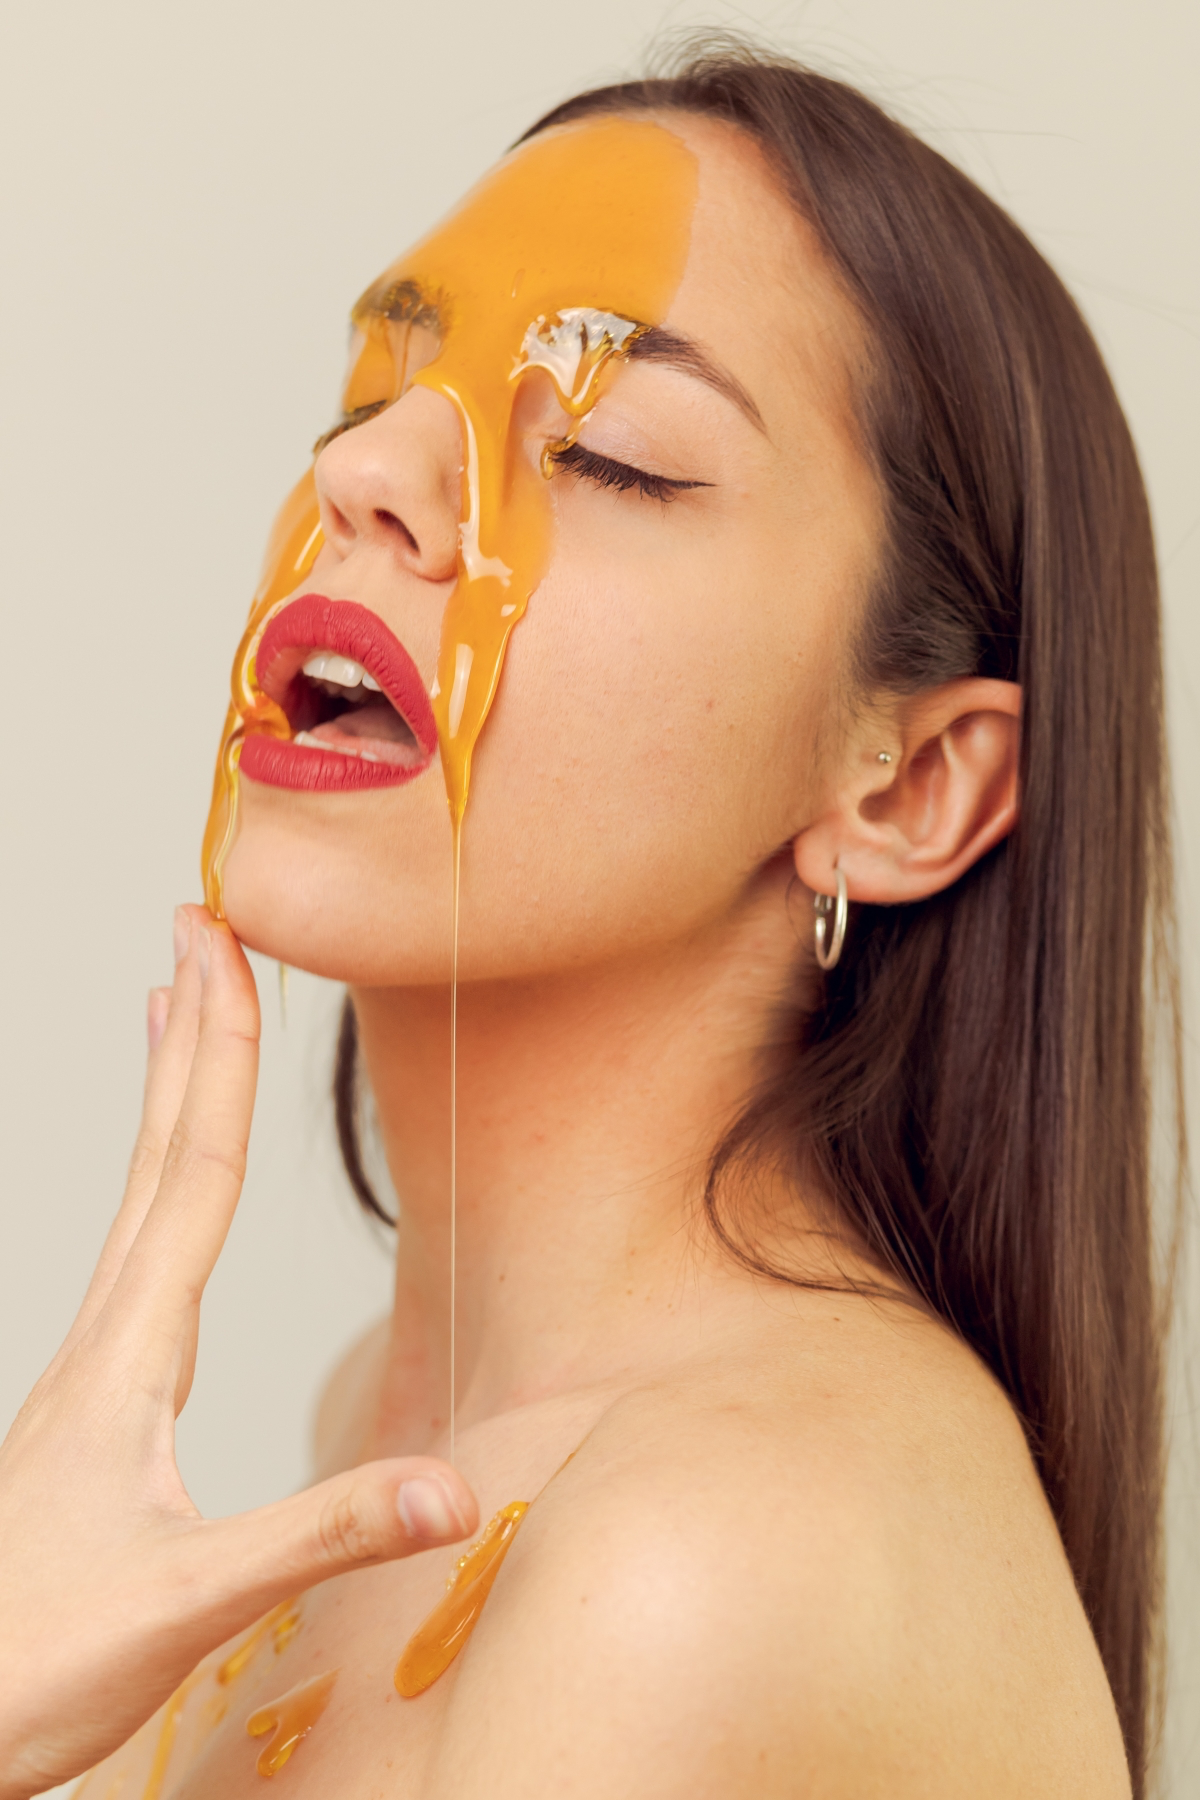 what are the benefits of using honey on your face